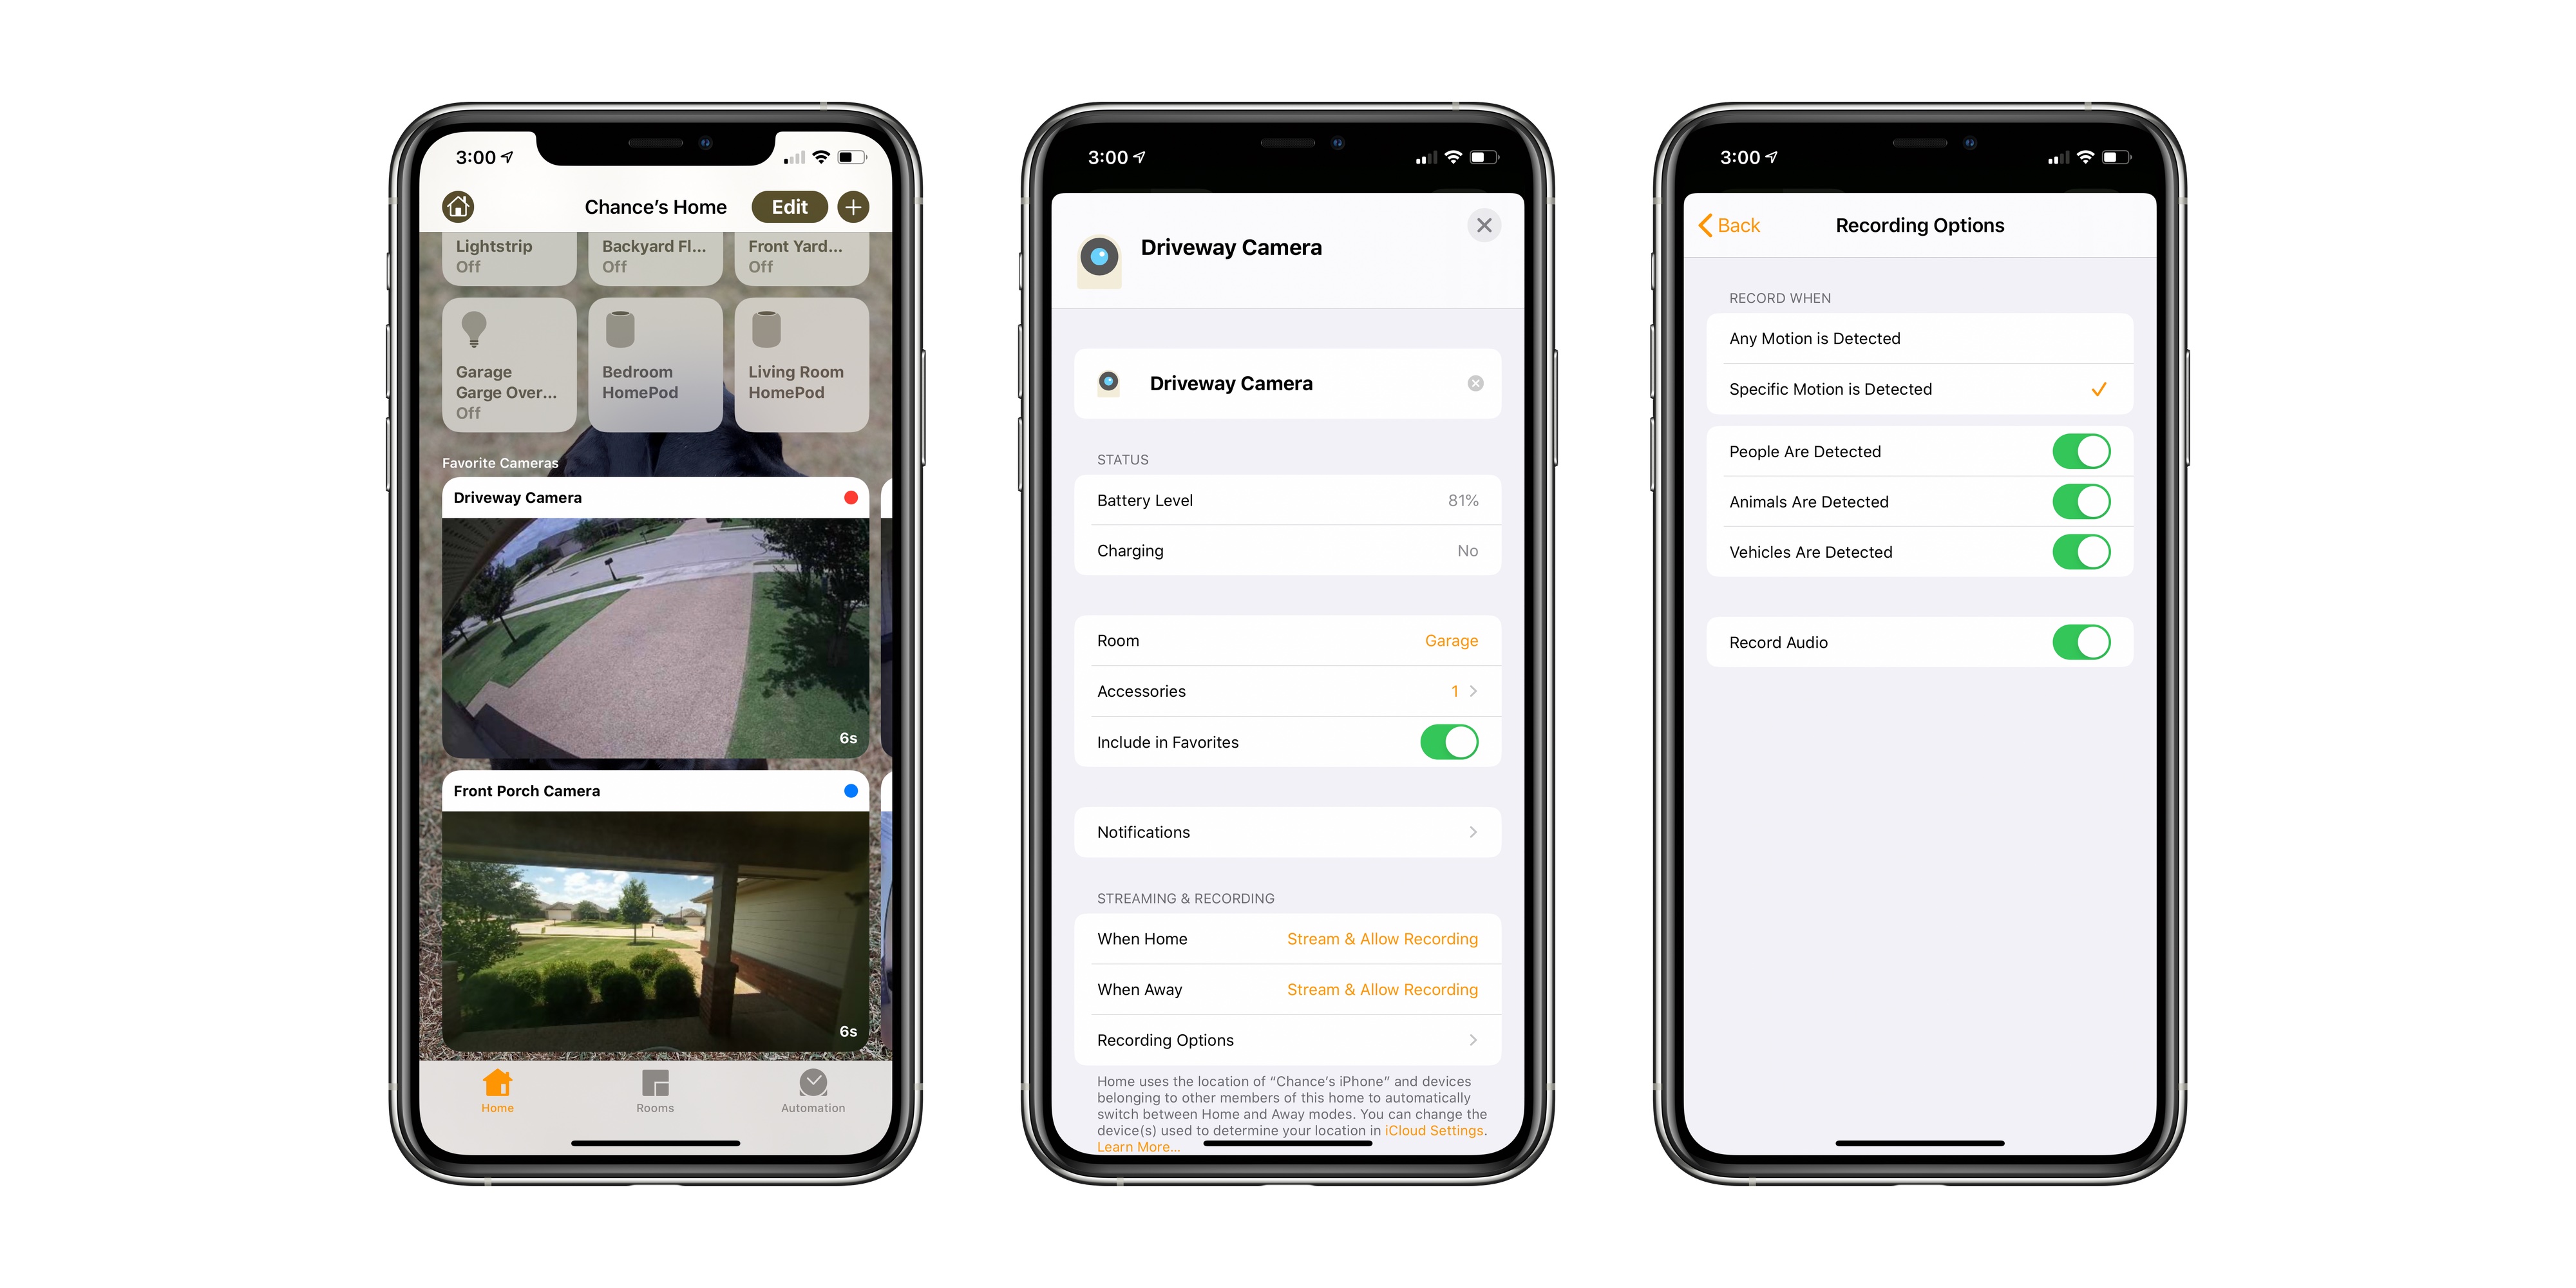 Eufy rolling out HomeKit Secure Video 